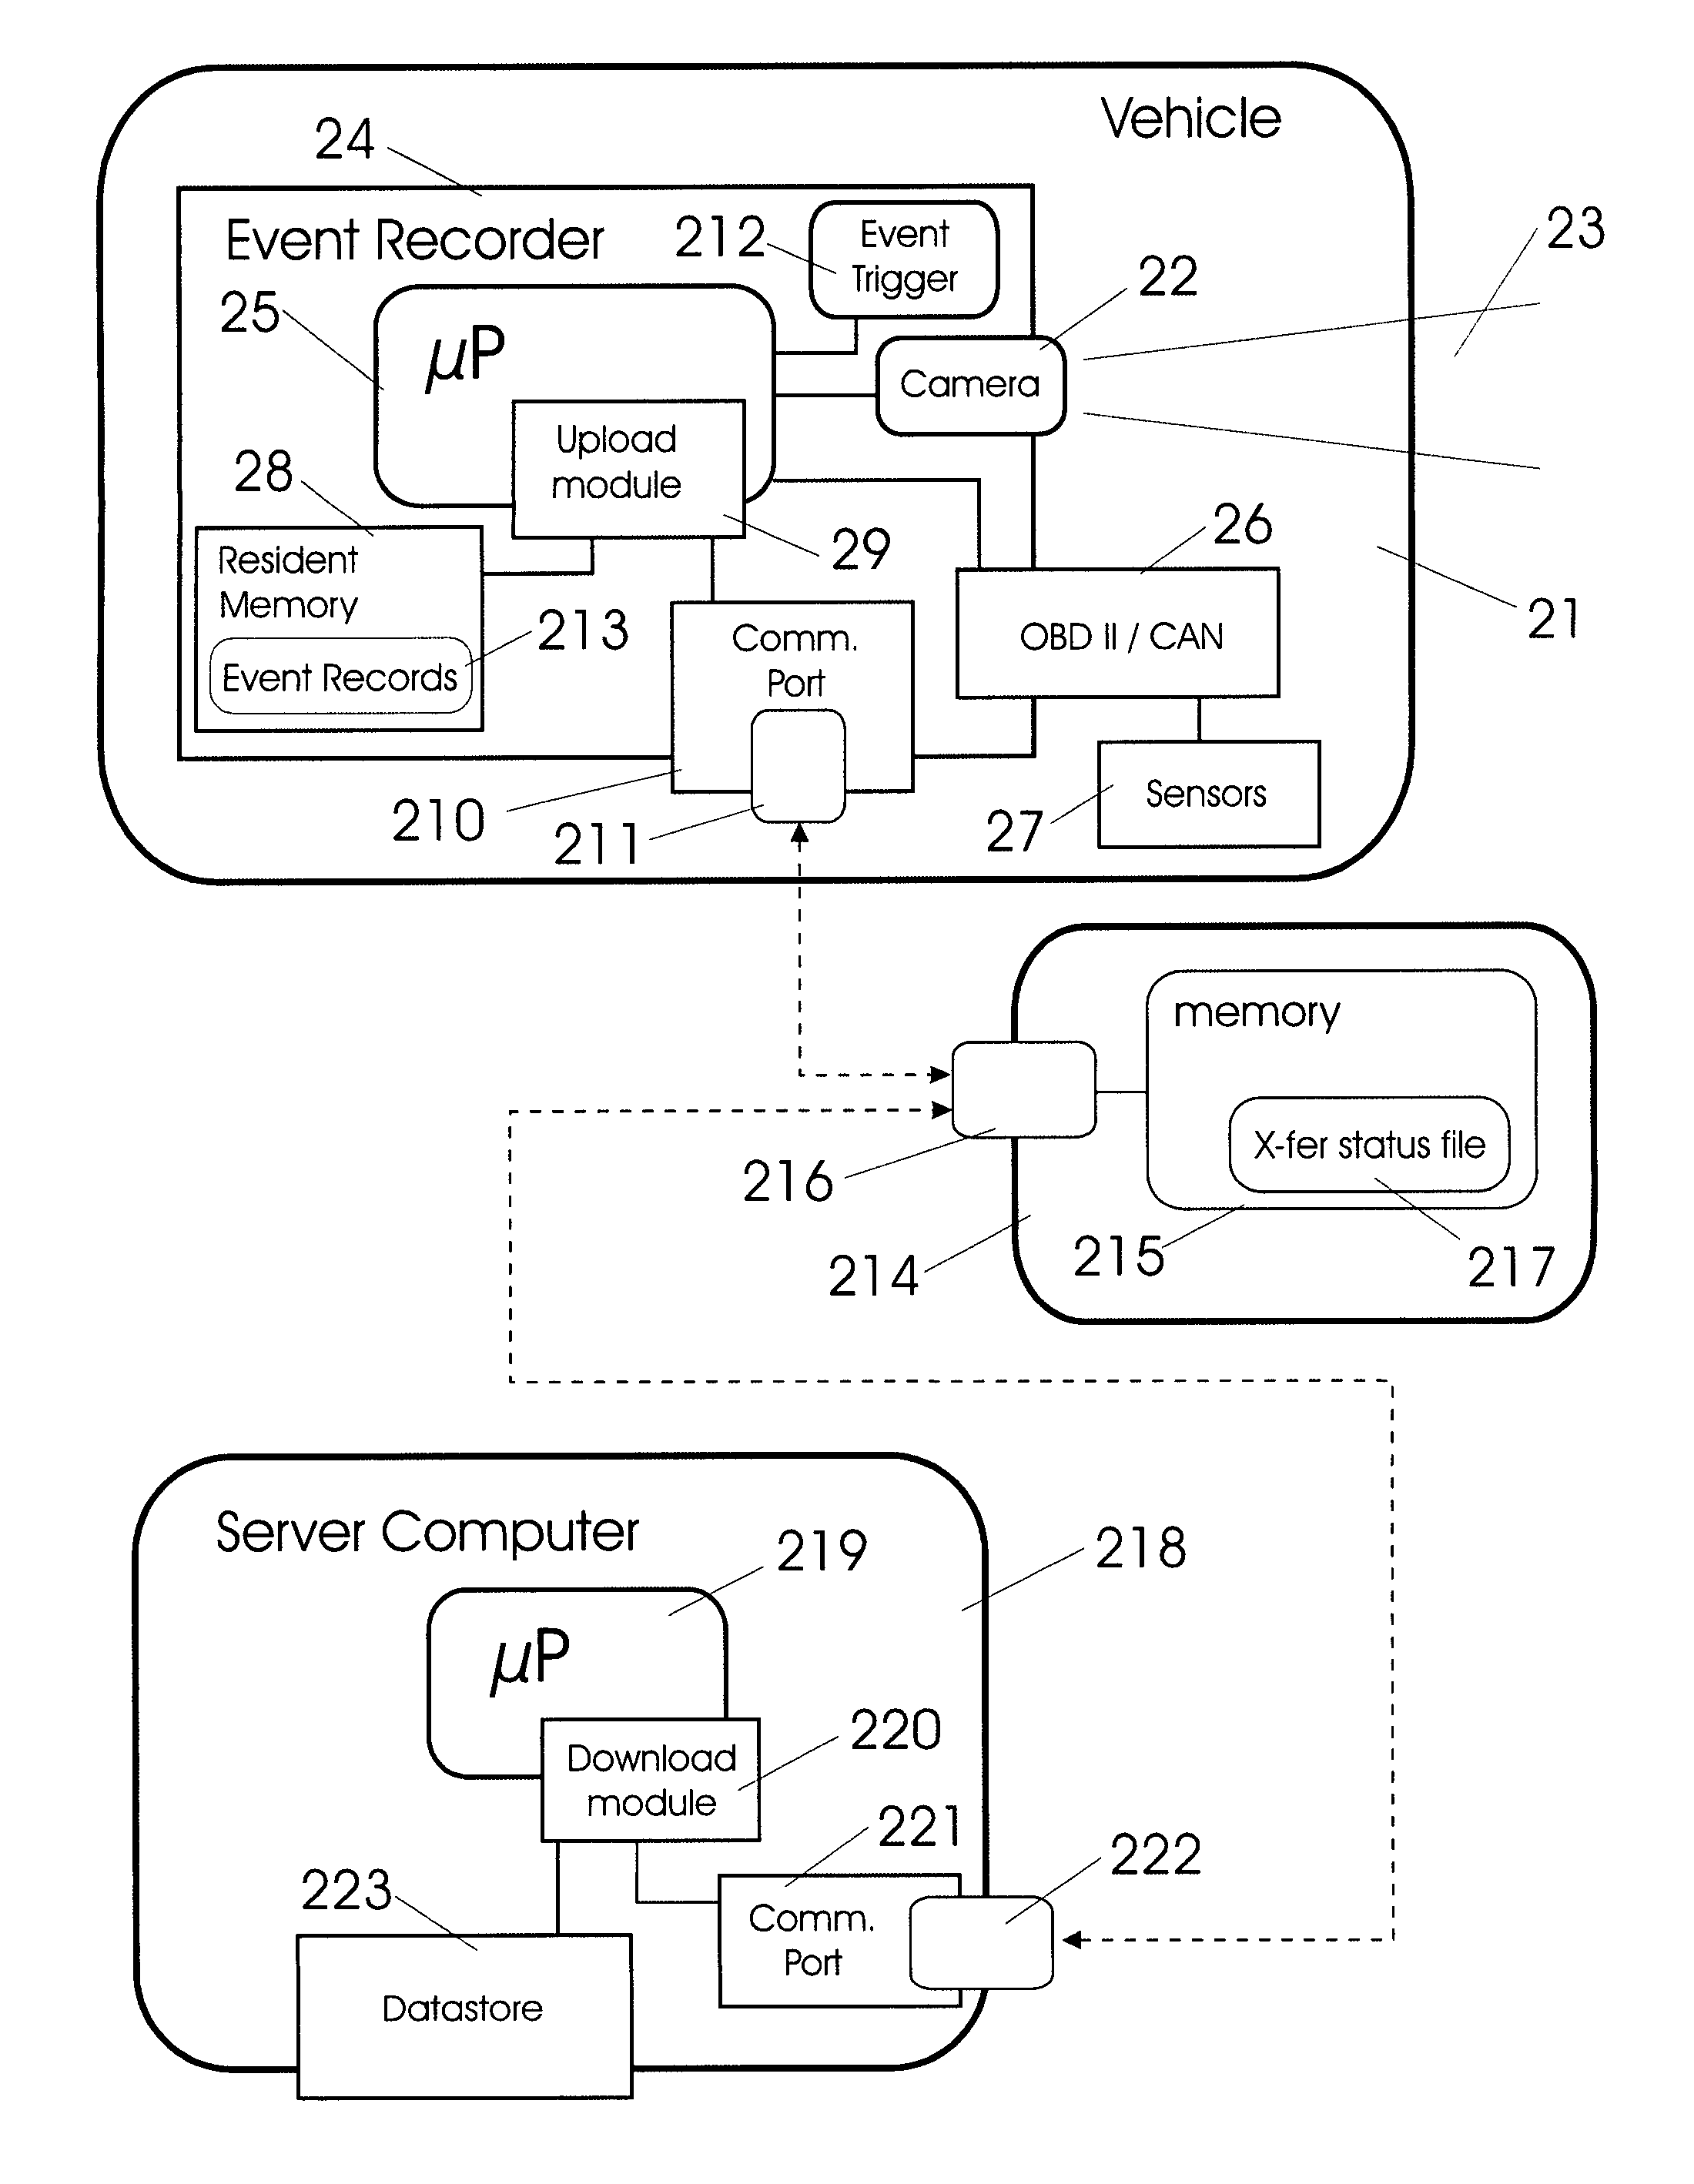 Distributed vehicle event recorder systems having a portable memory data transfer system